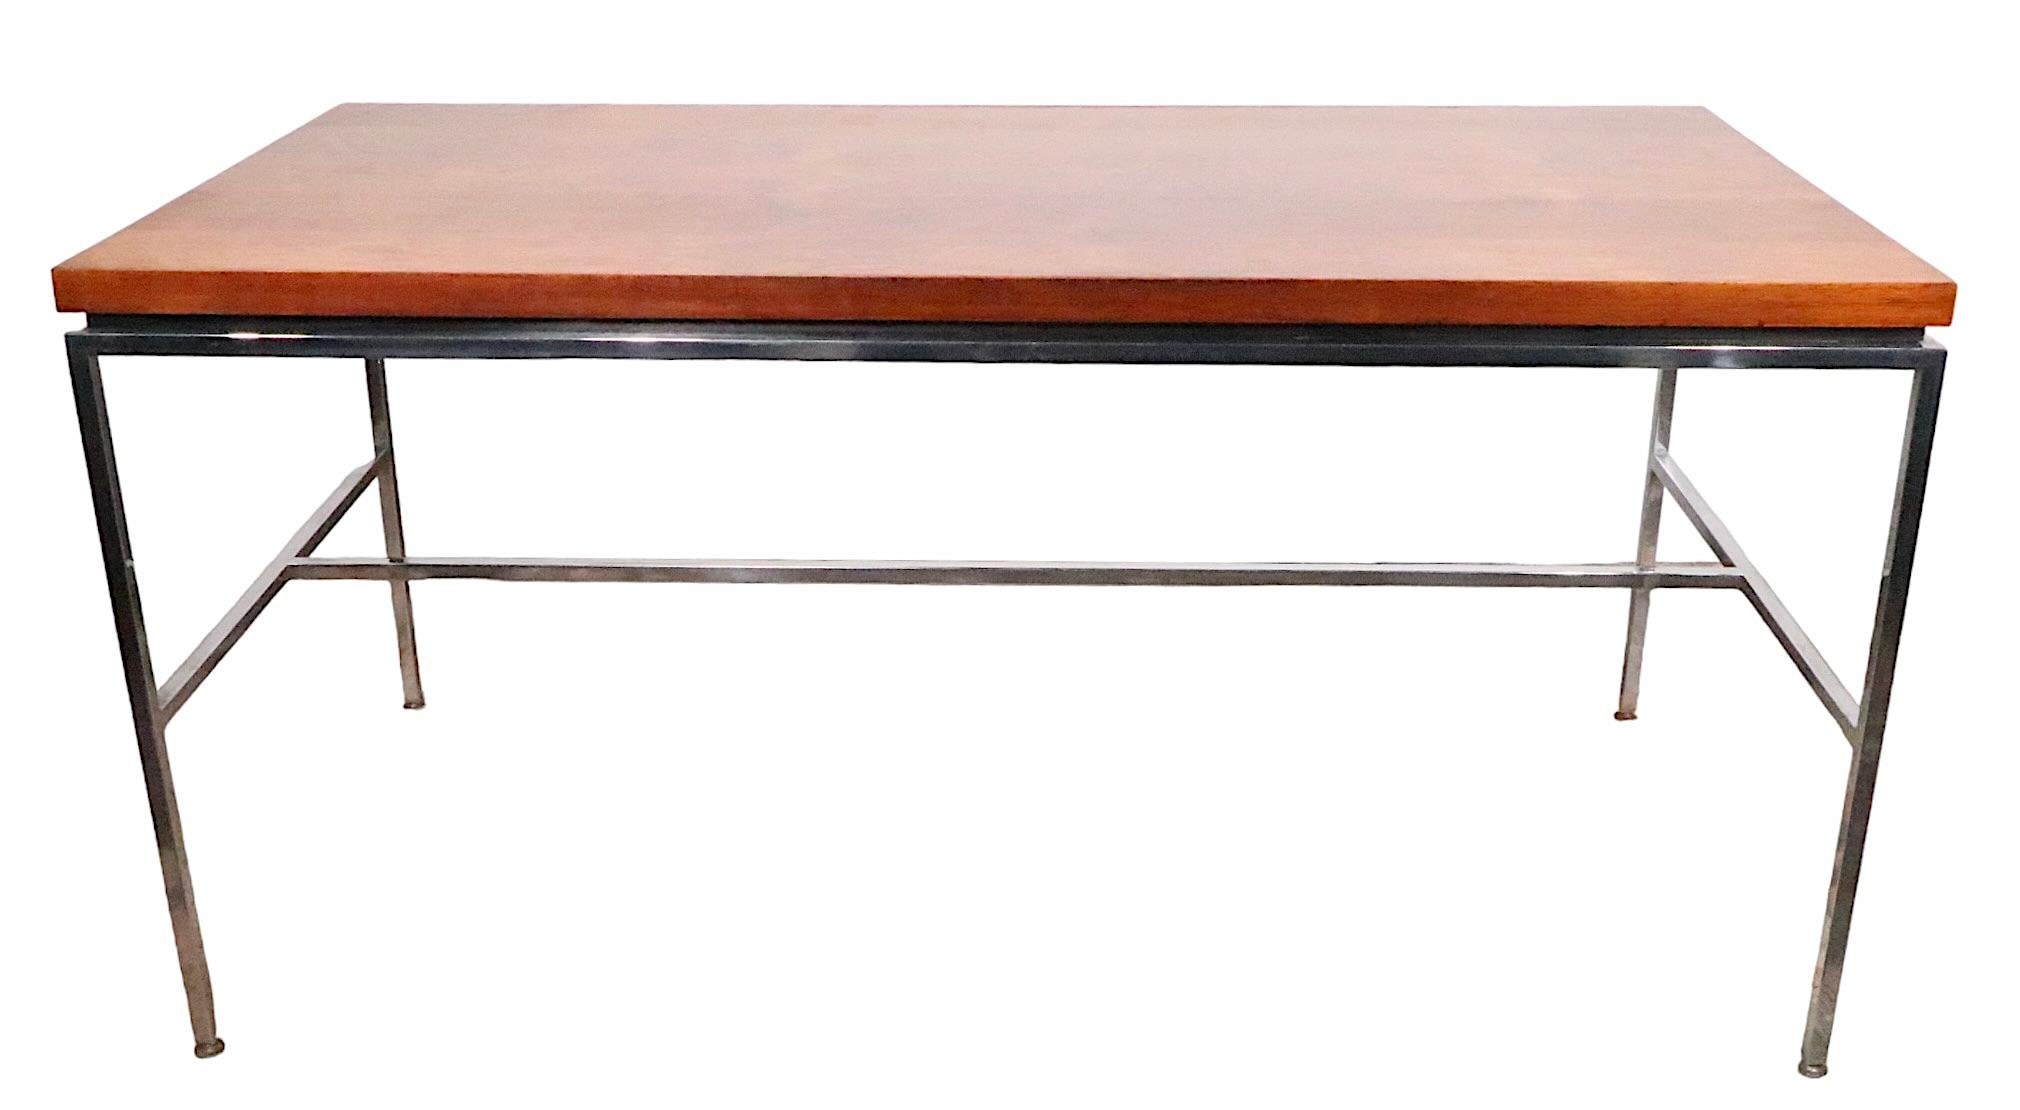 20th Century Rosewood and Chrome Drexel Index Writing Desk Library Table, circa 1970s For Sale